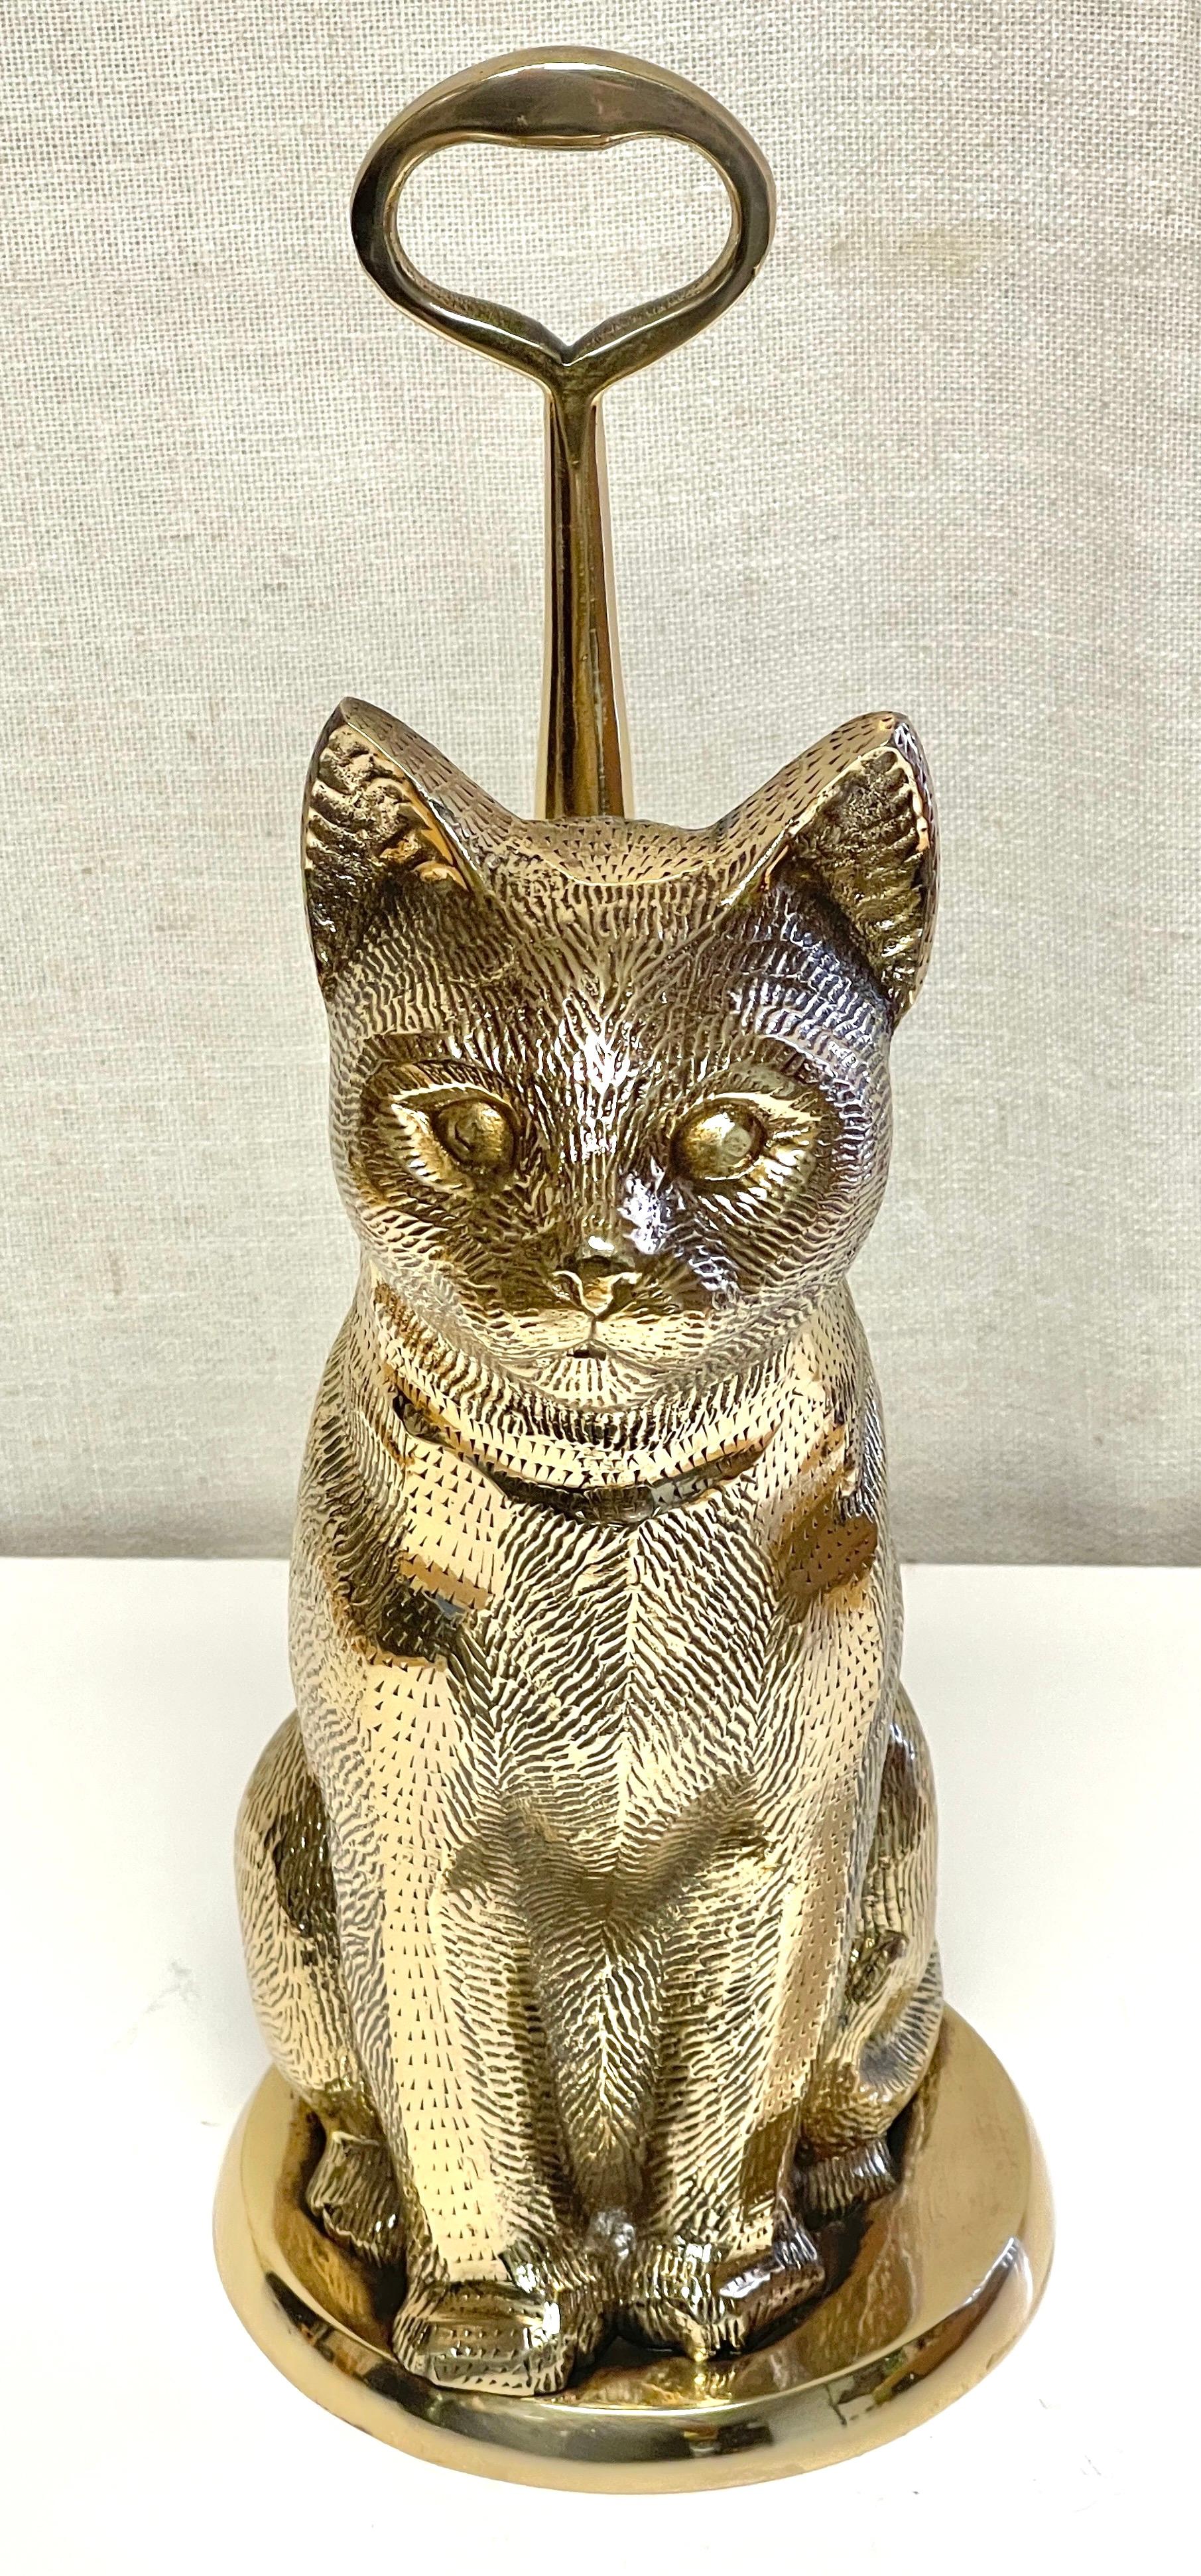 Mid-Century brass handled cat doorstop, by Sarreid Ltd.
Spain, Circa 1970s

A rare and unique model, by famed the Sarreid Ltd. foundry. 
The well thought out design, complete with the raised column oval handle, supporting the seated